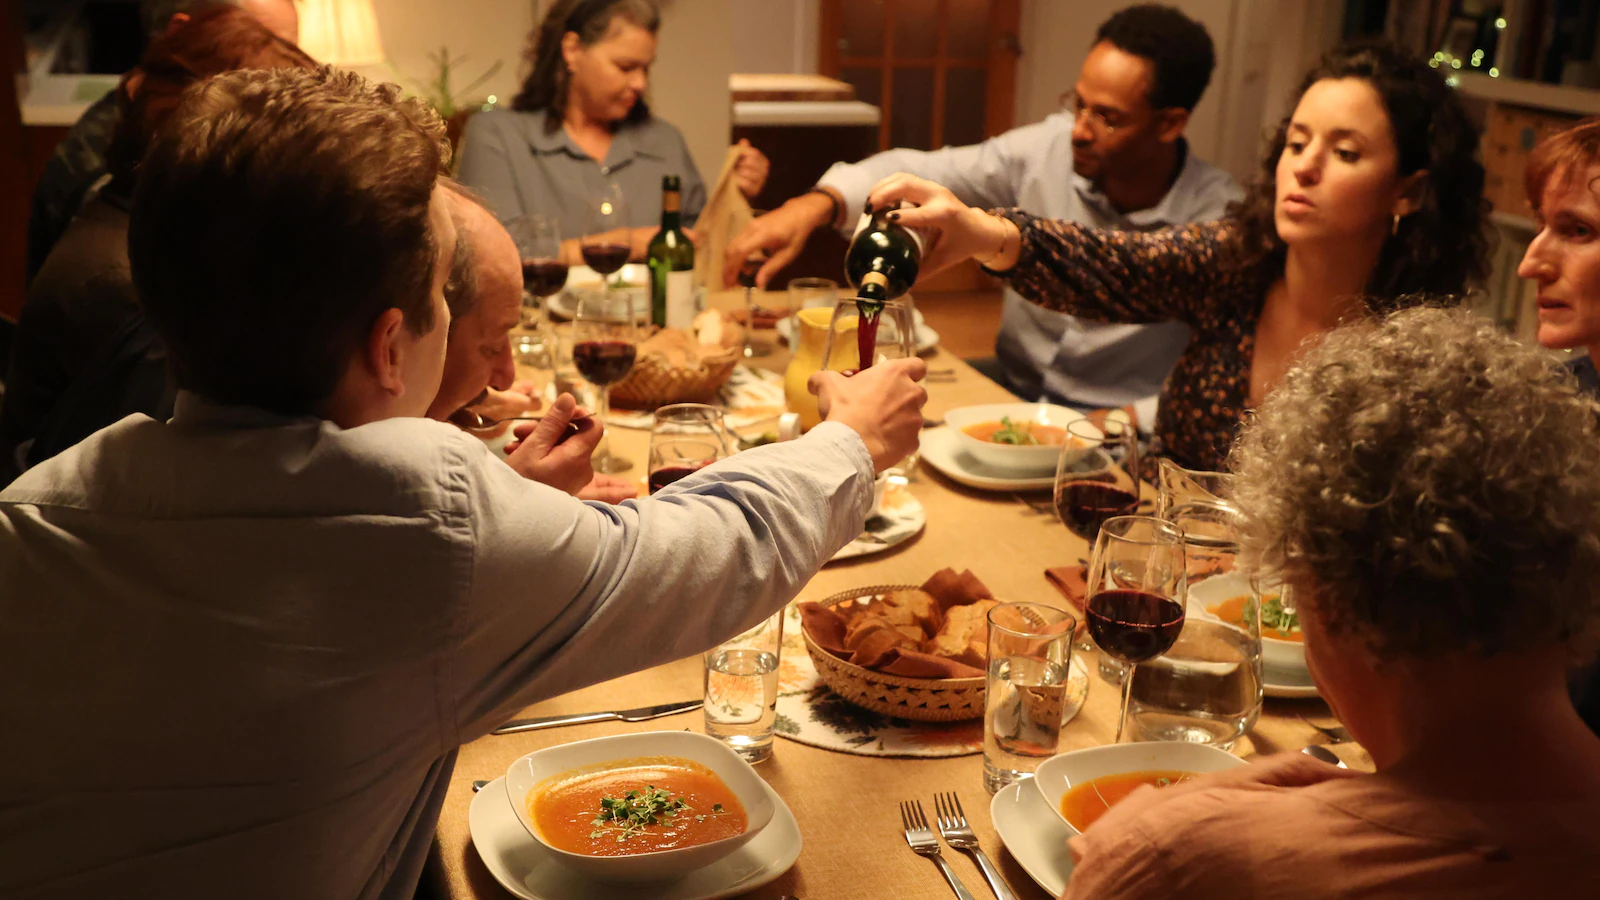 Several people share the meal around a table and one person serves red wine to one of the guests. 